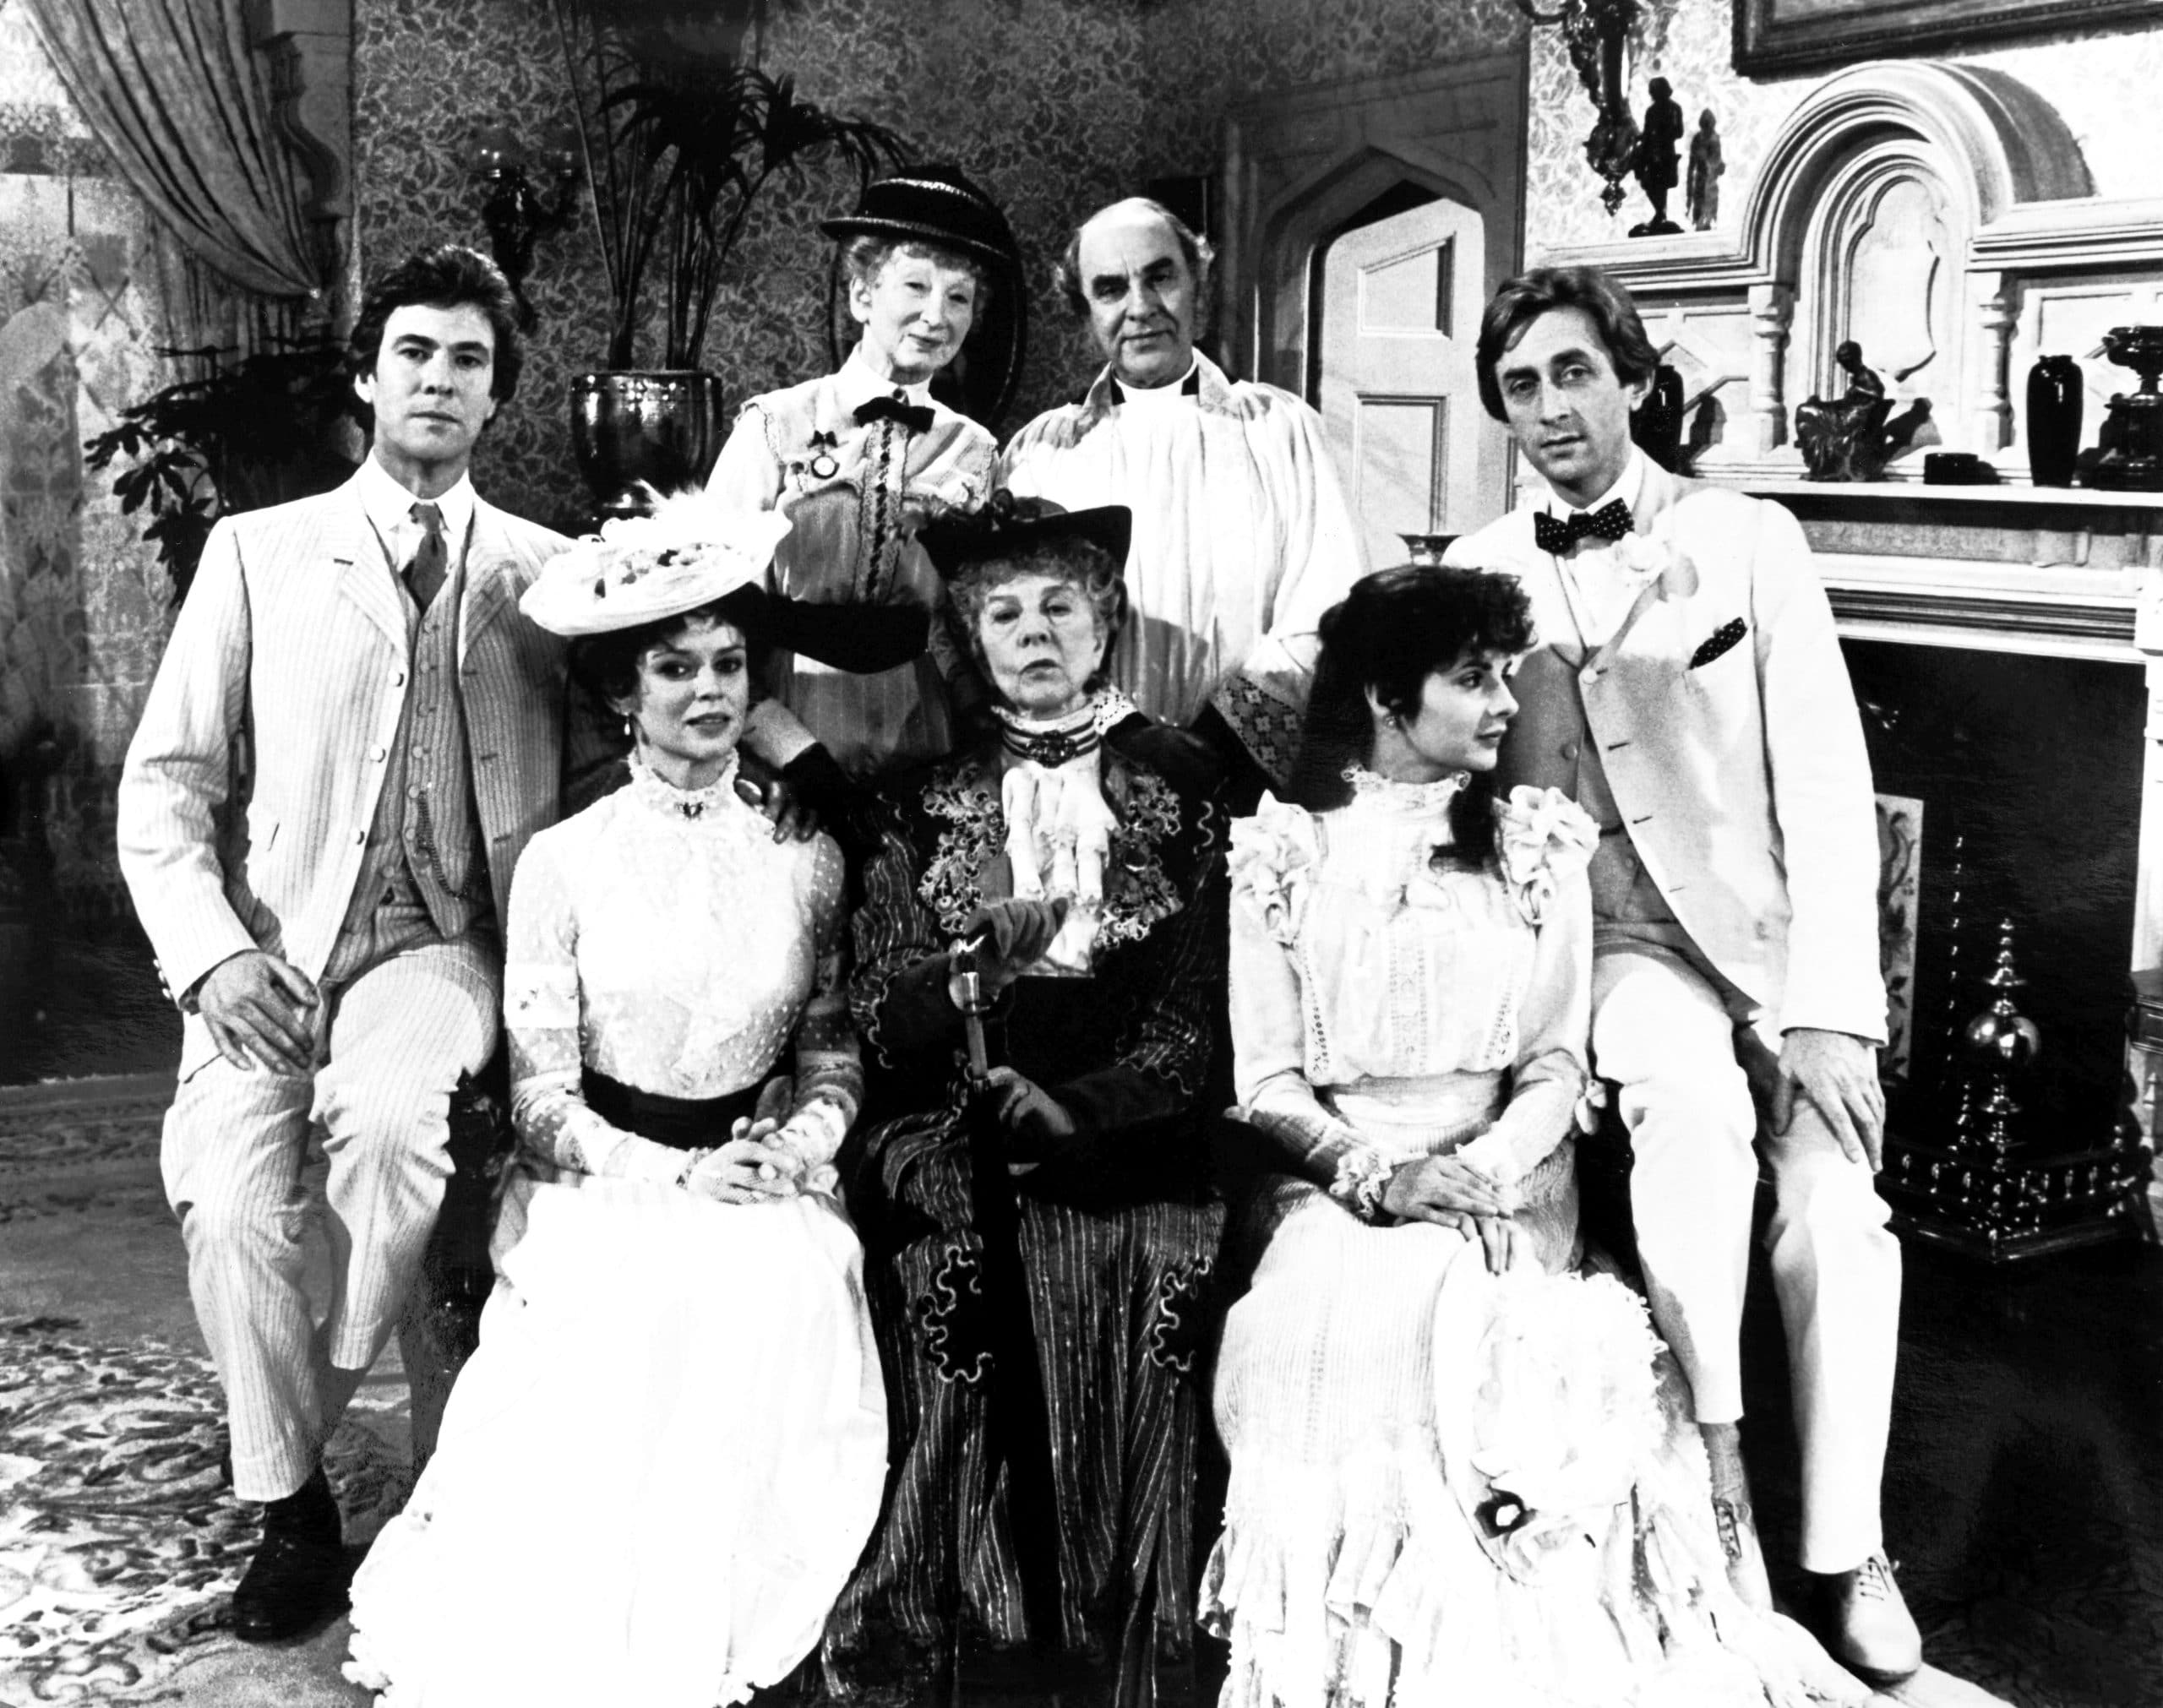 THE IMPORTANCE OF BEING EARNEST, top, from left, Gary Bond, Rosamund Greenwood, Henry Moxon, Jeremy Clyde; bottom, from left, Gabrielle Drake, Wendy Hiller, Ann Thornton, aired November 29, 1985